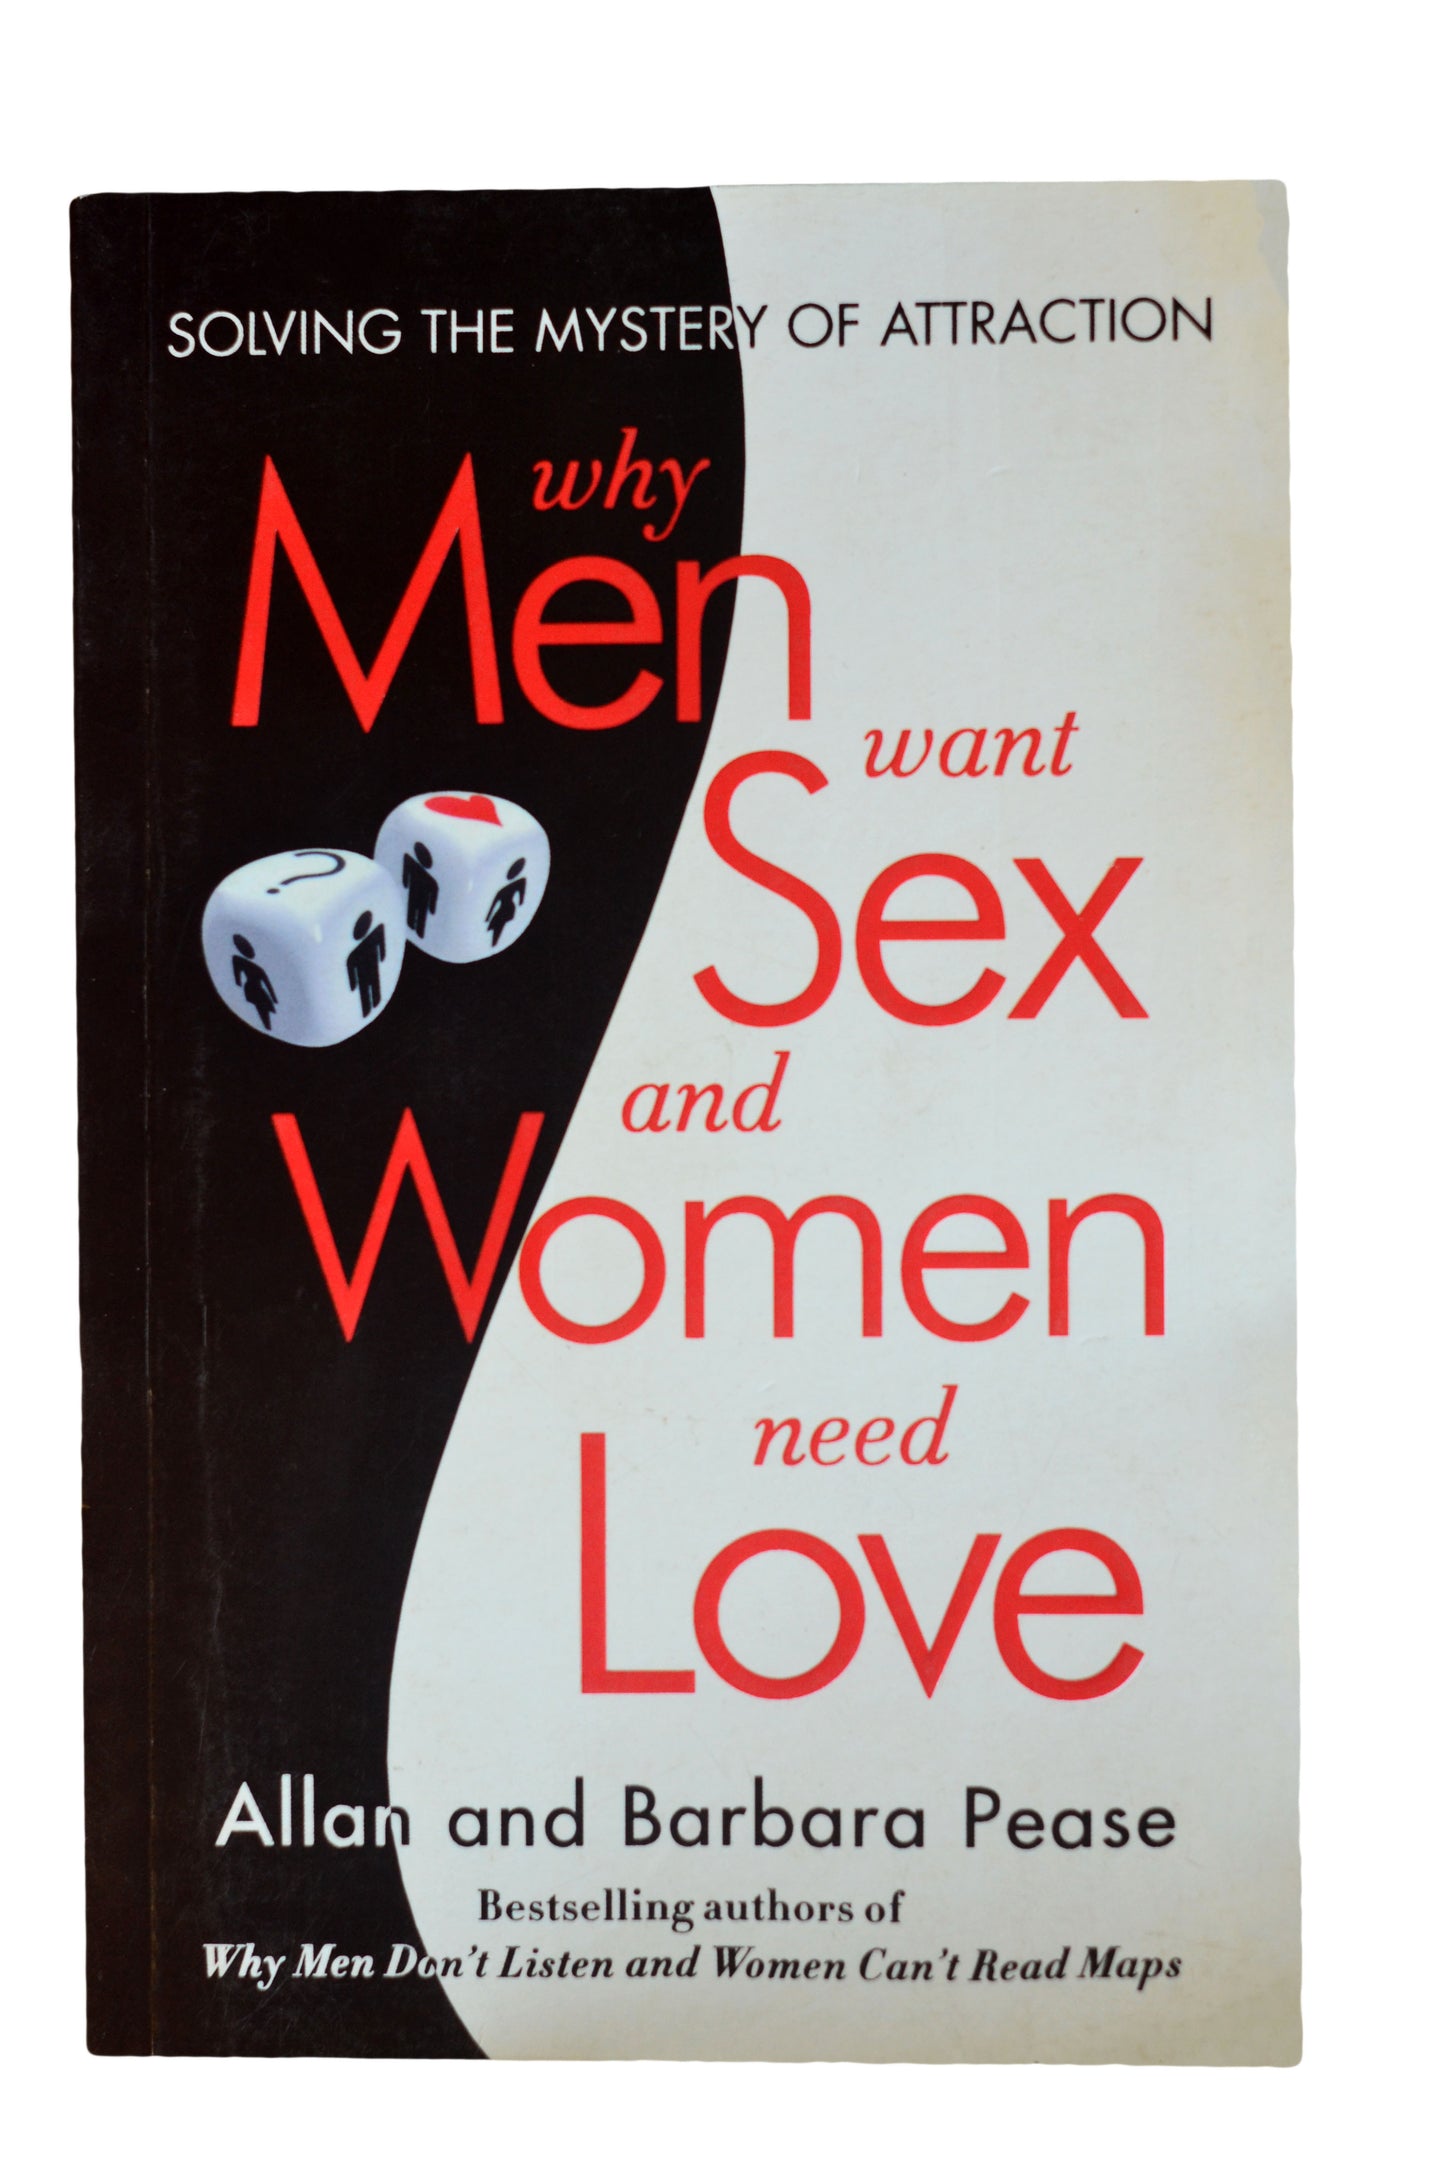 WHY MEN WANT SEX AND WOMAN NEED LOVE